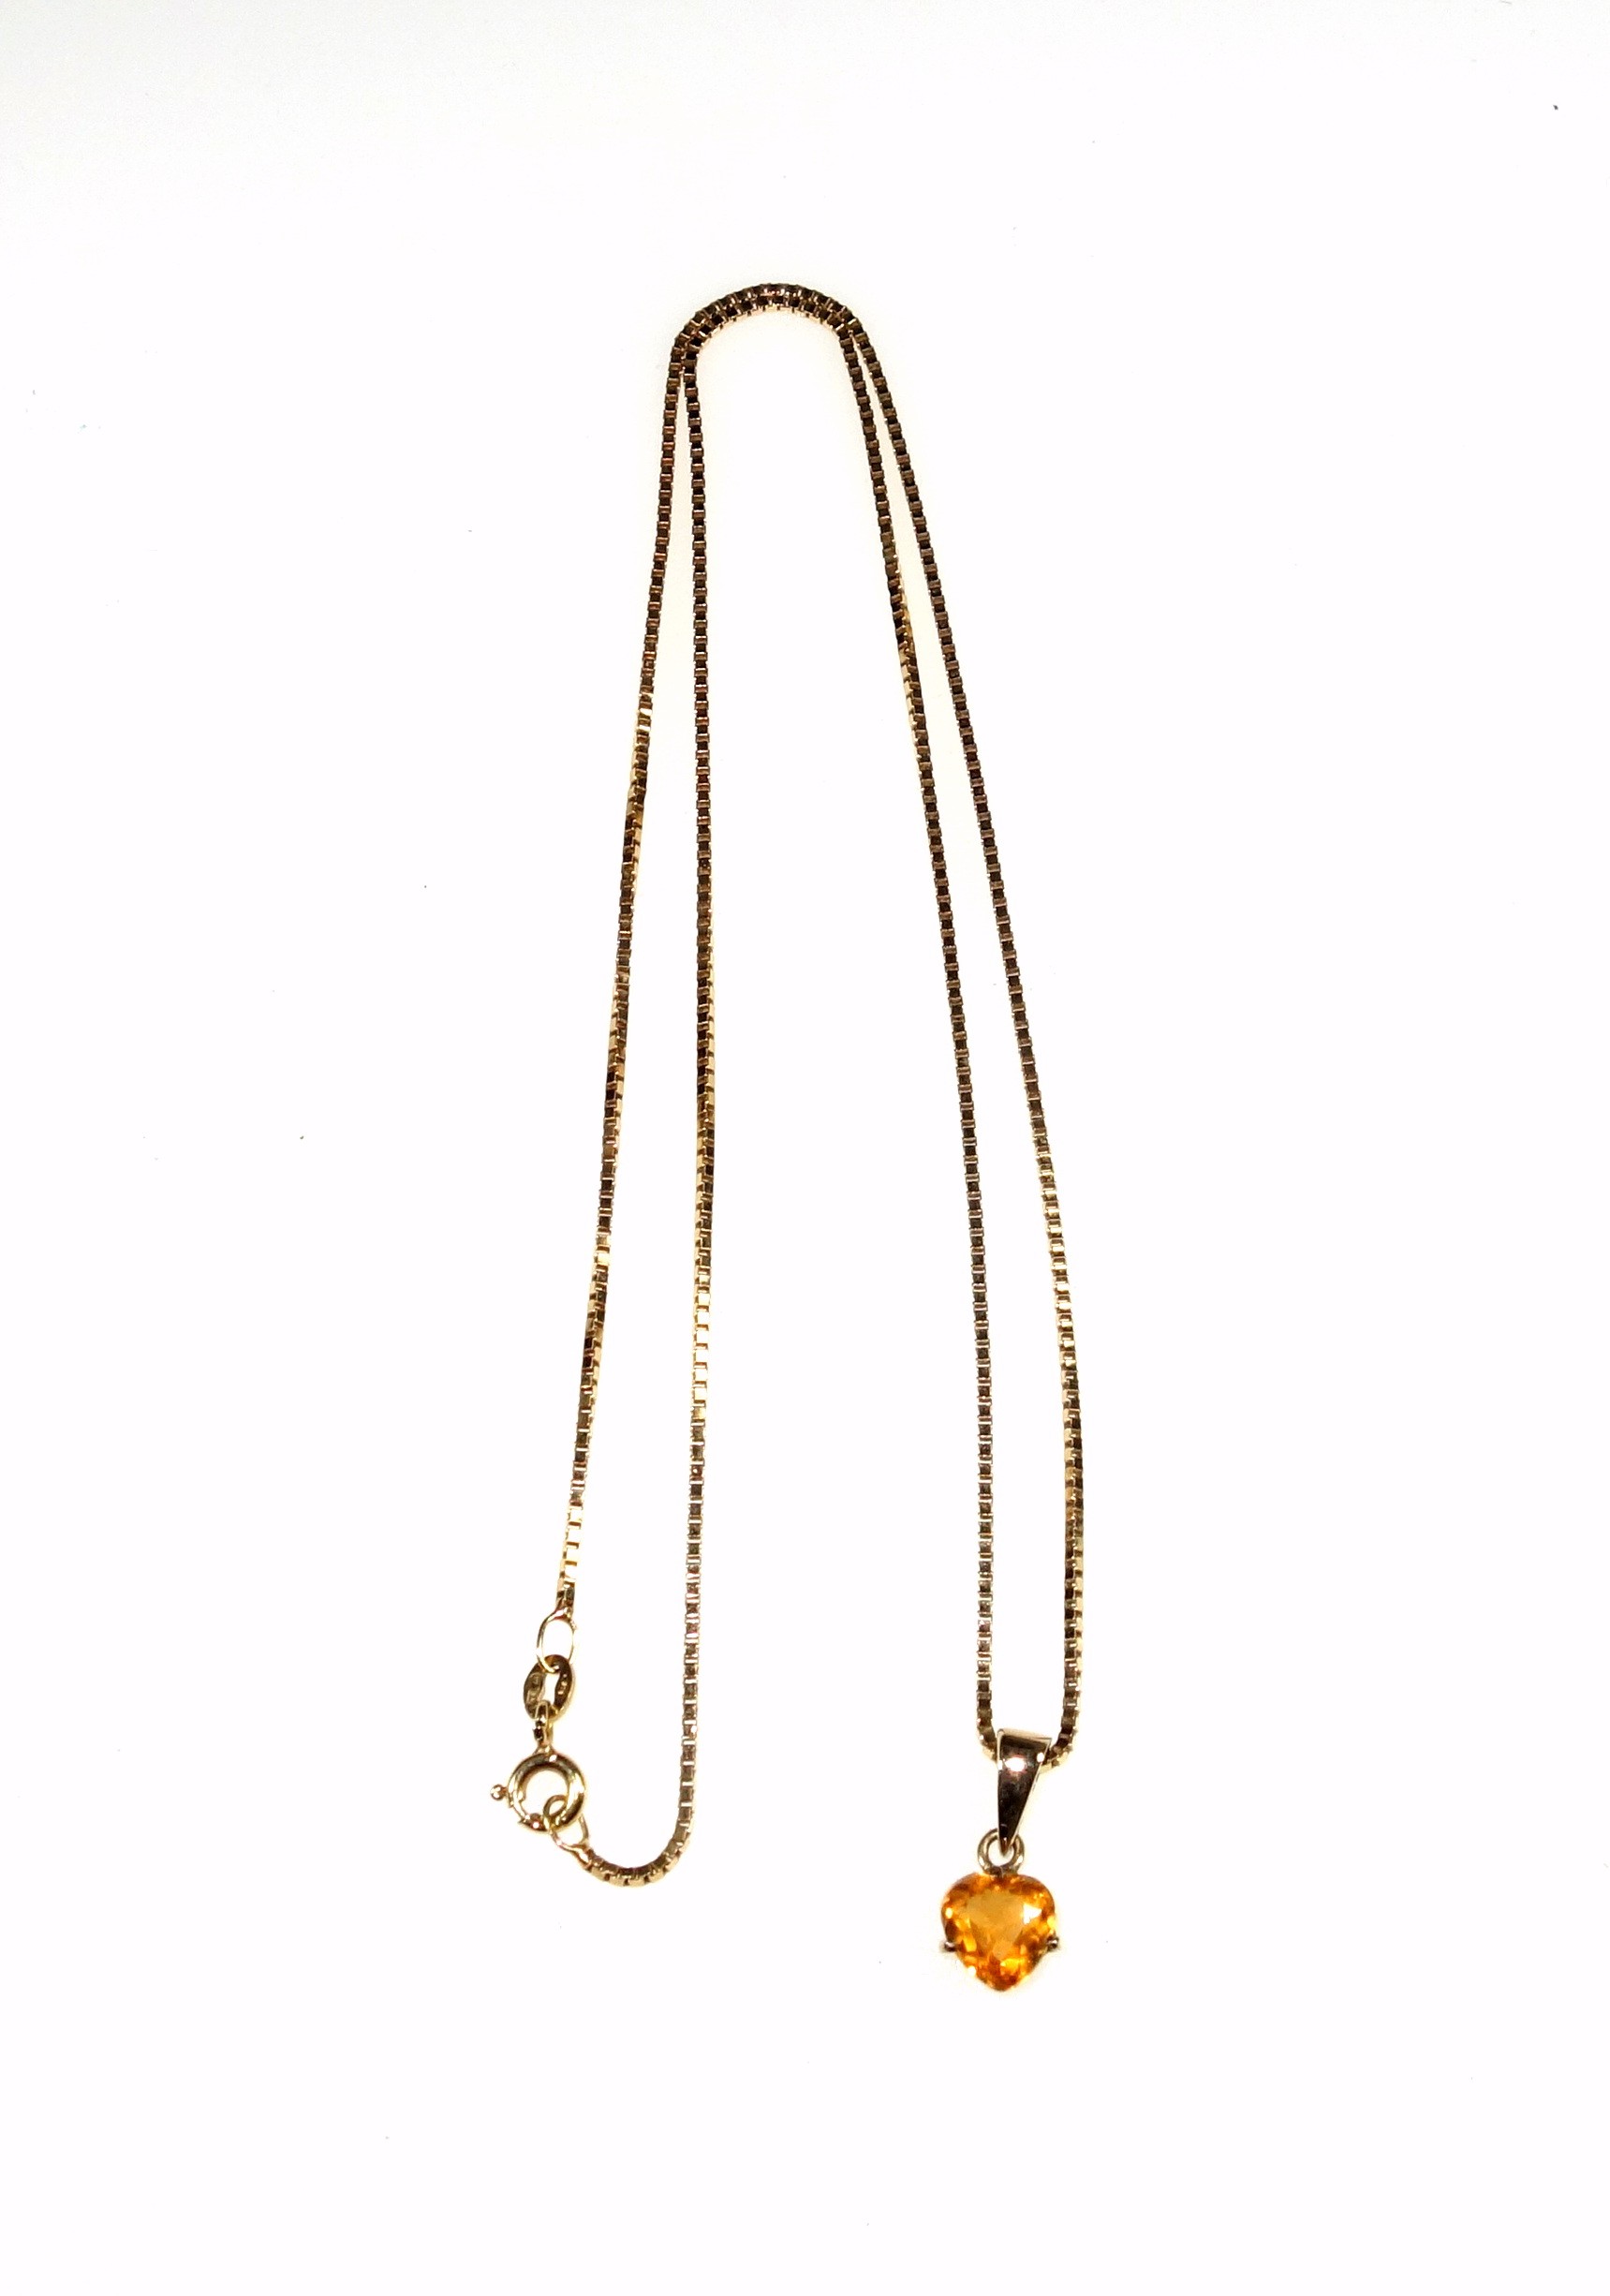 9ct gold Unoaerre box link necklace, length 46.5cm approx., and citrine heart shaped gold pendant, - Image 2 of 3